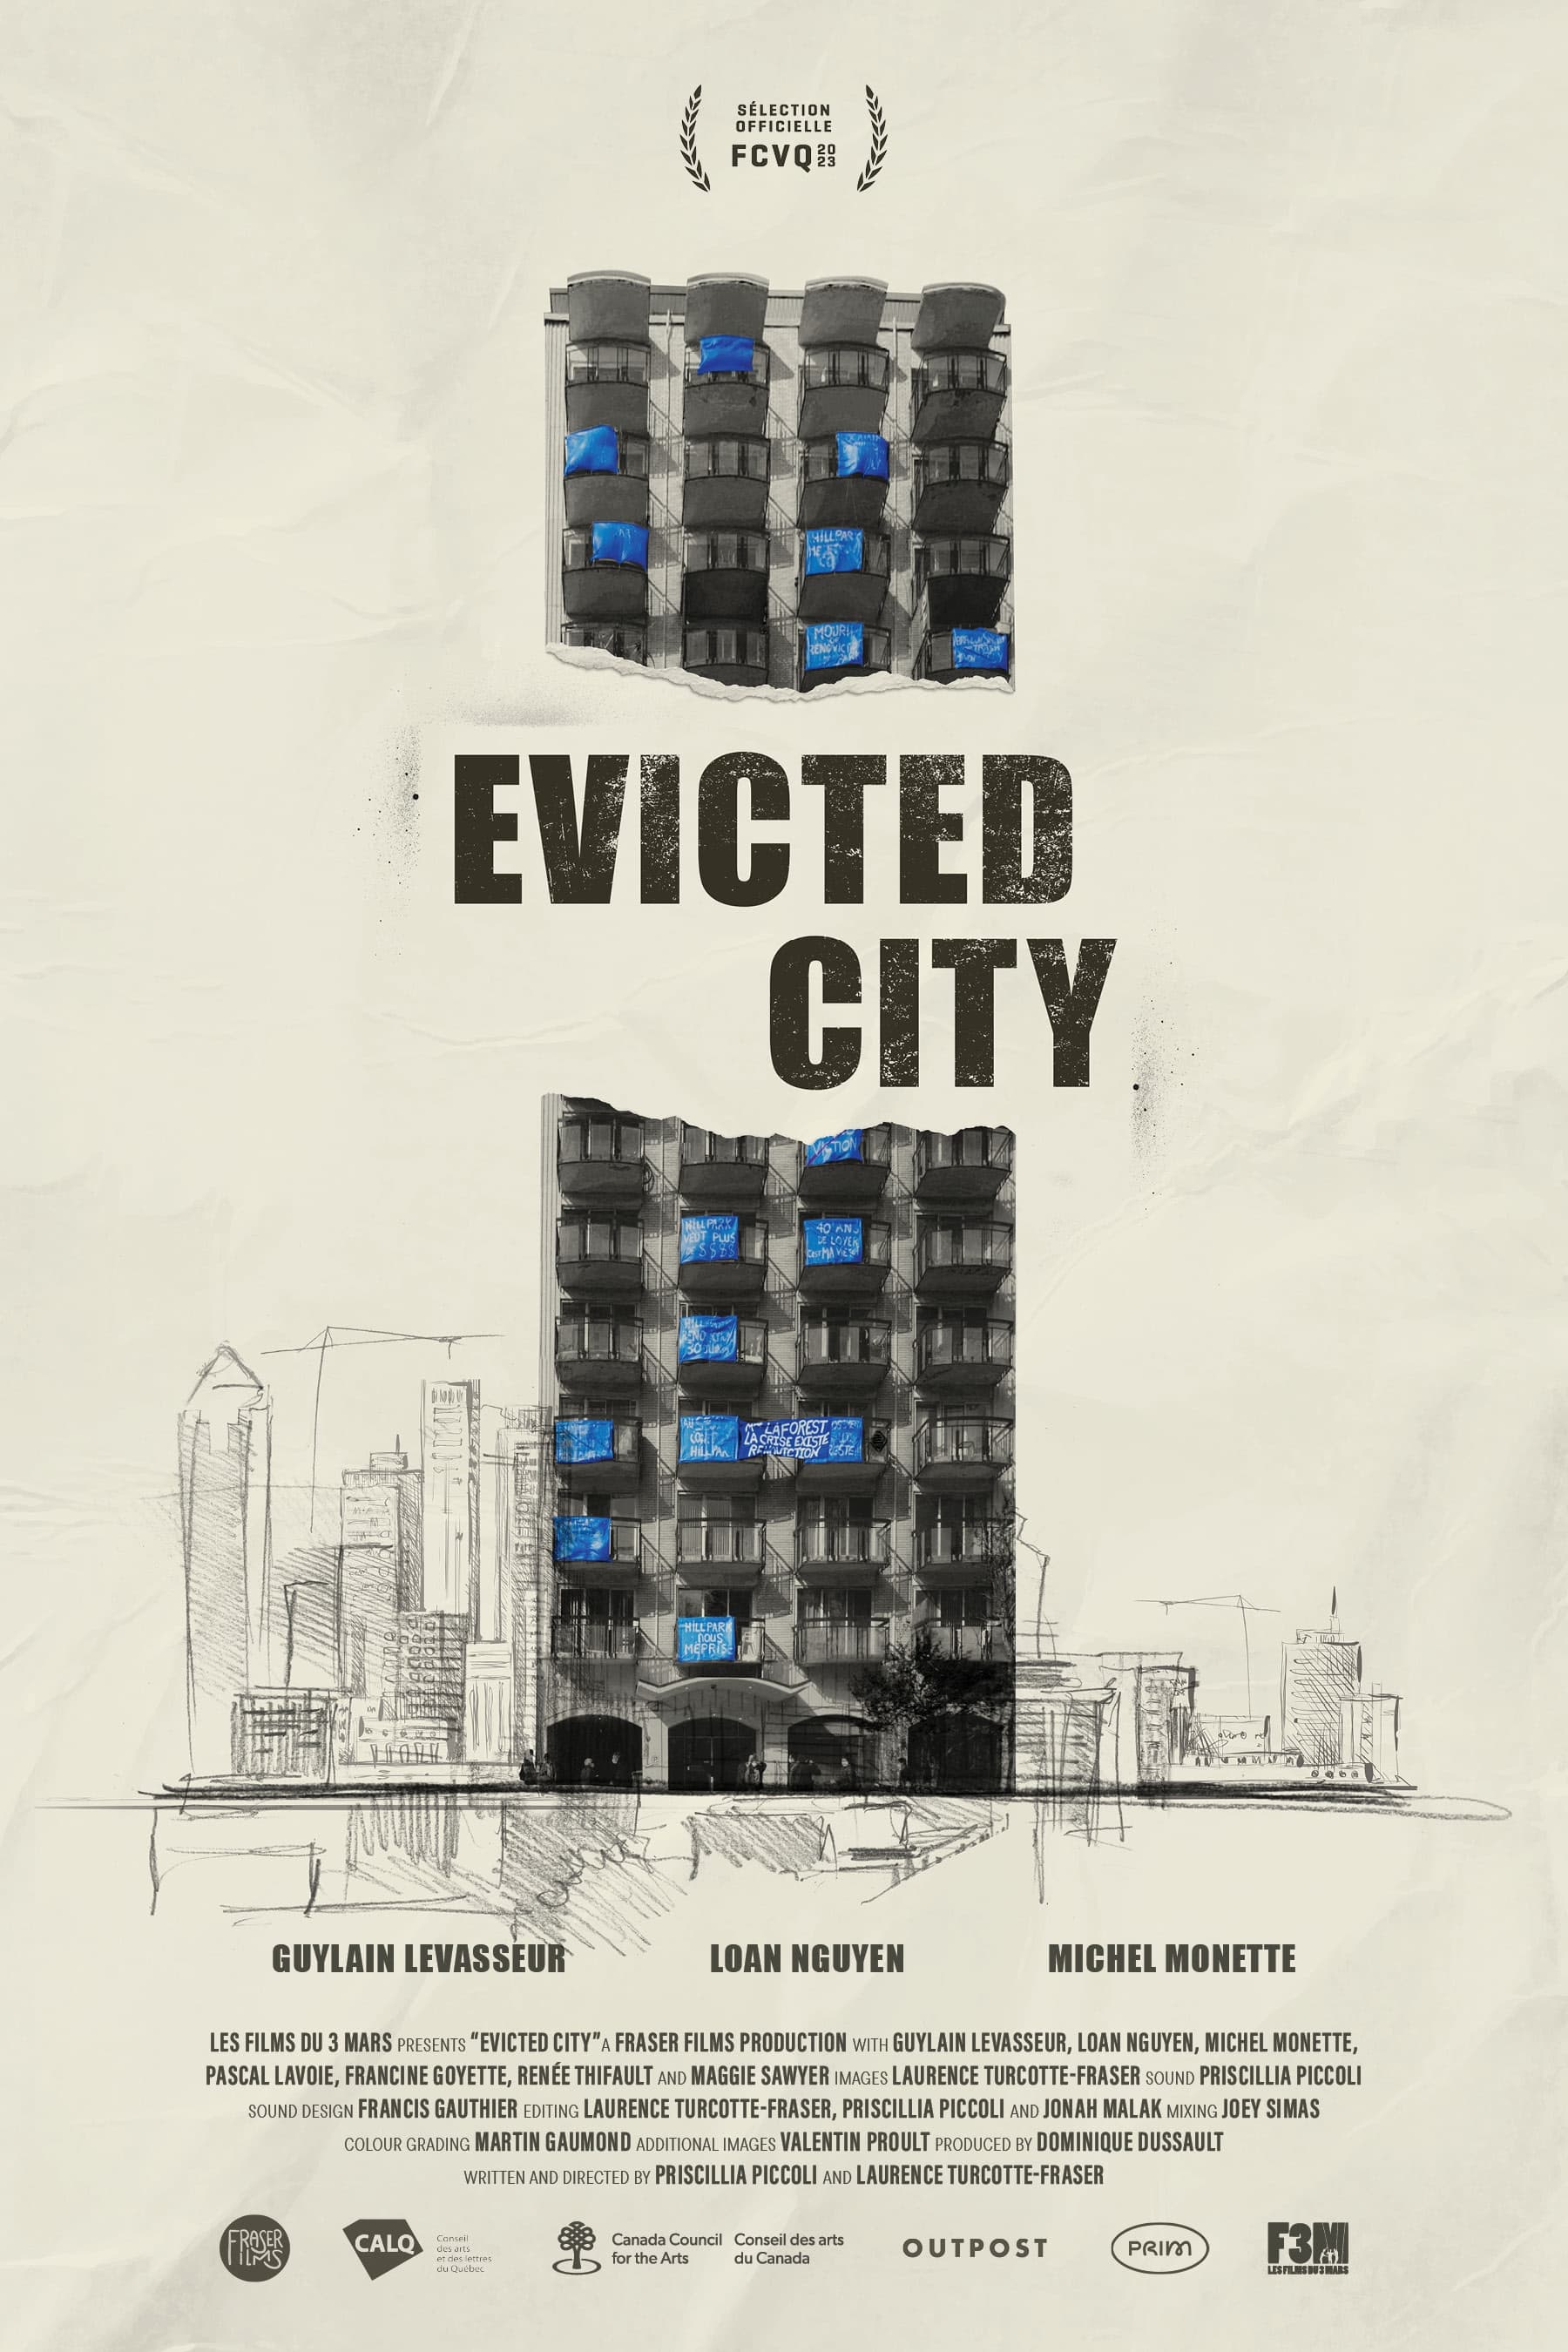 Evicted City